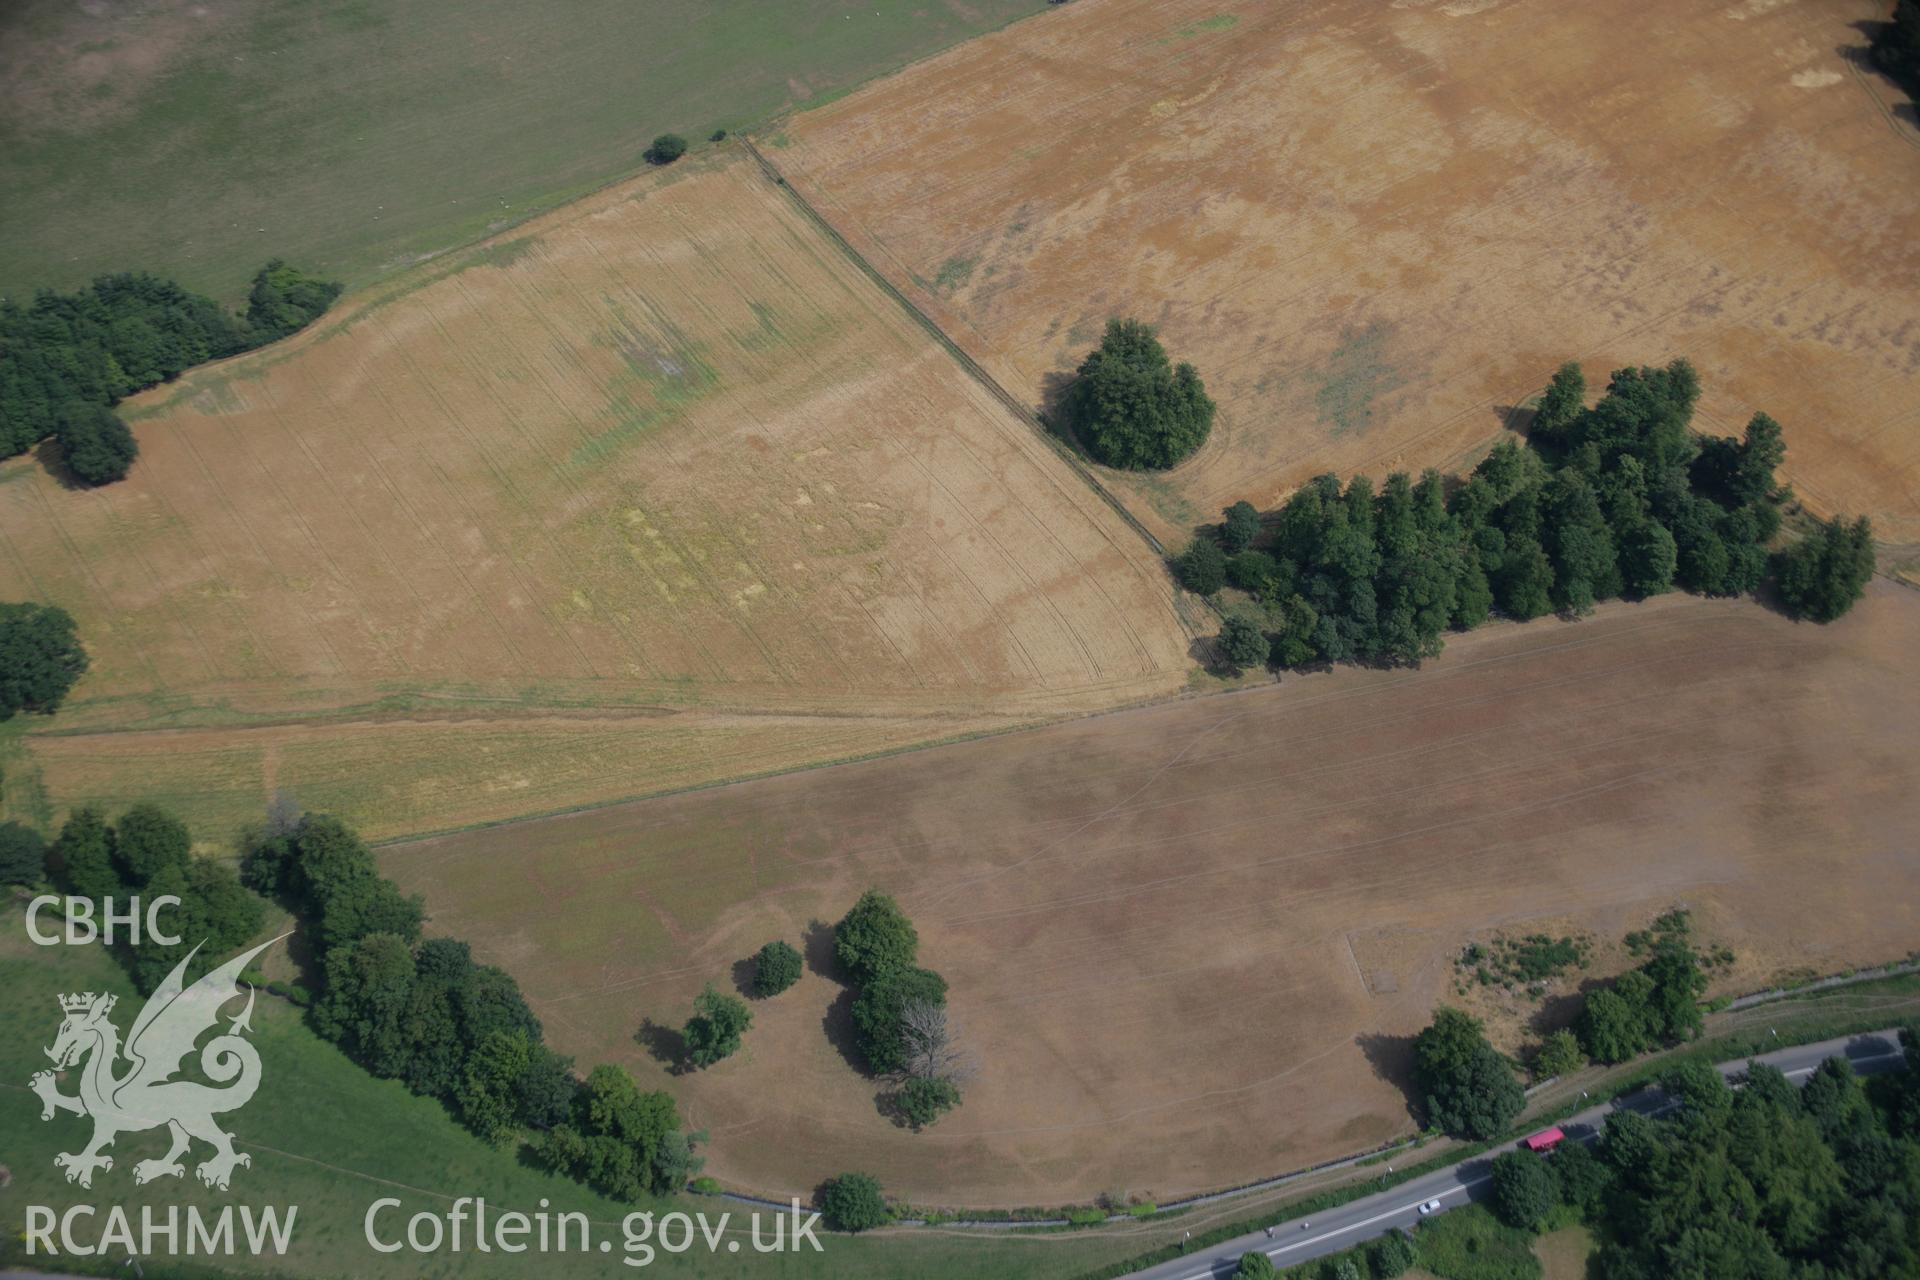 RCAHMW colour oblique aerial photograph of cropmarks near Llandegai Henge Monuments and Cursus. Taken on 25 July 2006 by Toby Driver.